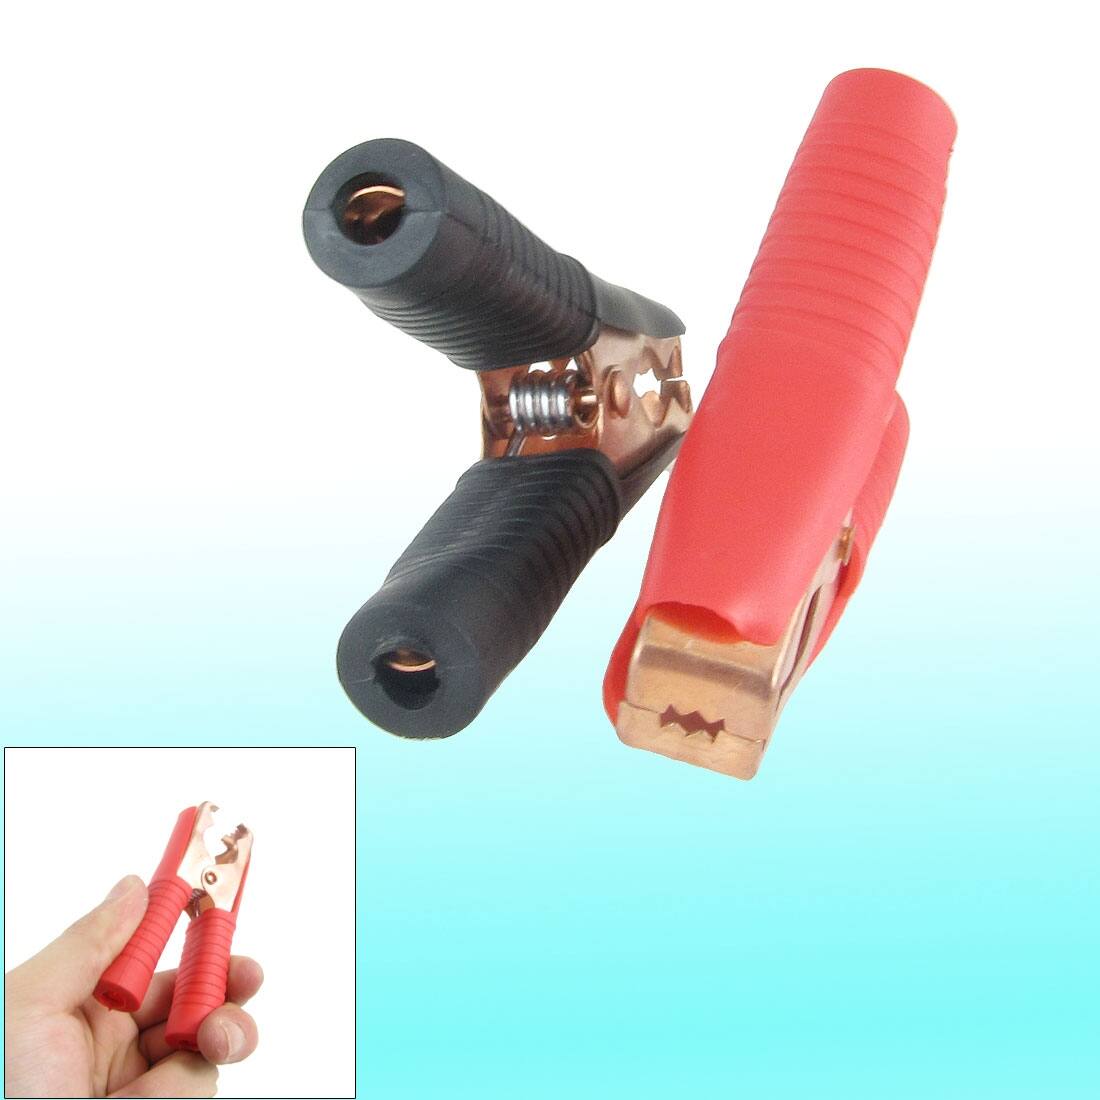 2x Plastic Handle 100A Copper Plated Metal Car Alligator Battery Clips - Black, Red, Copper Tone